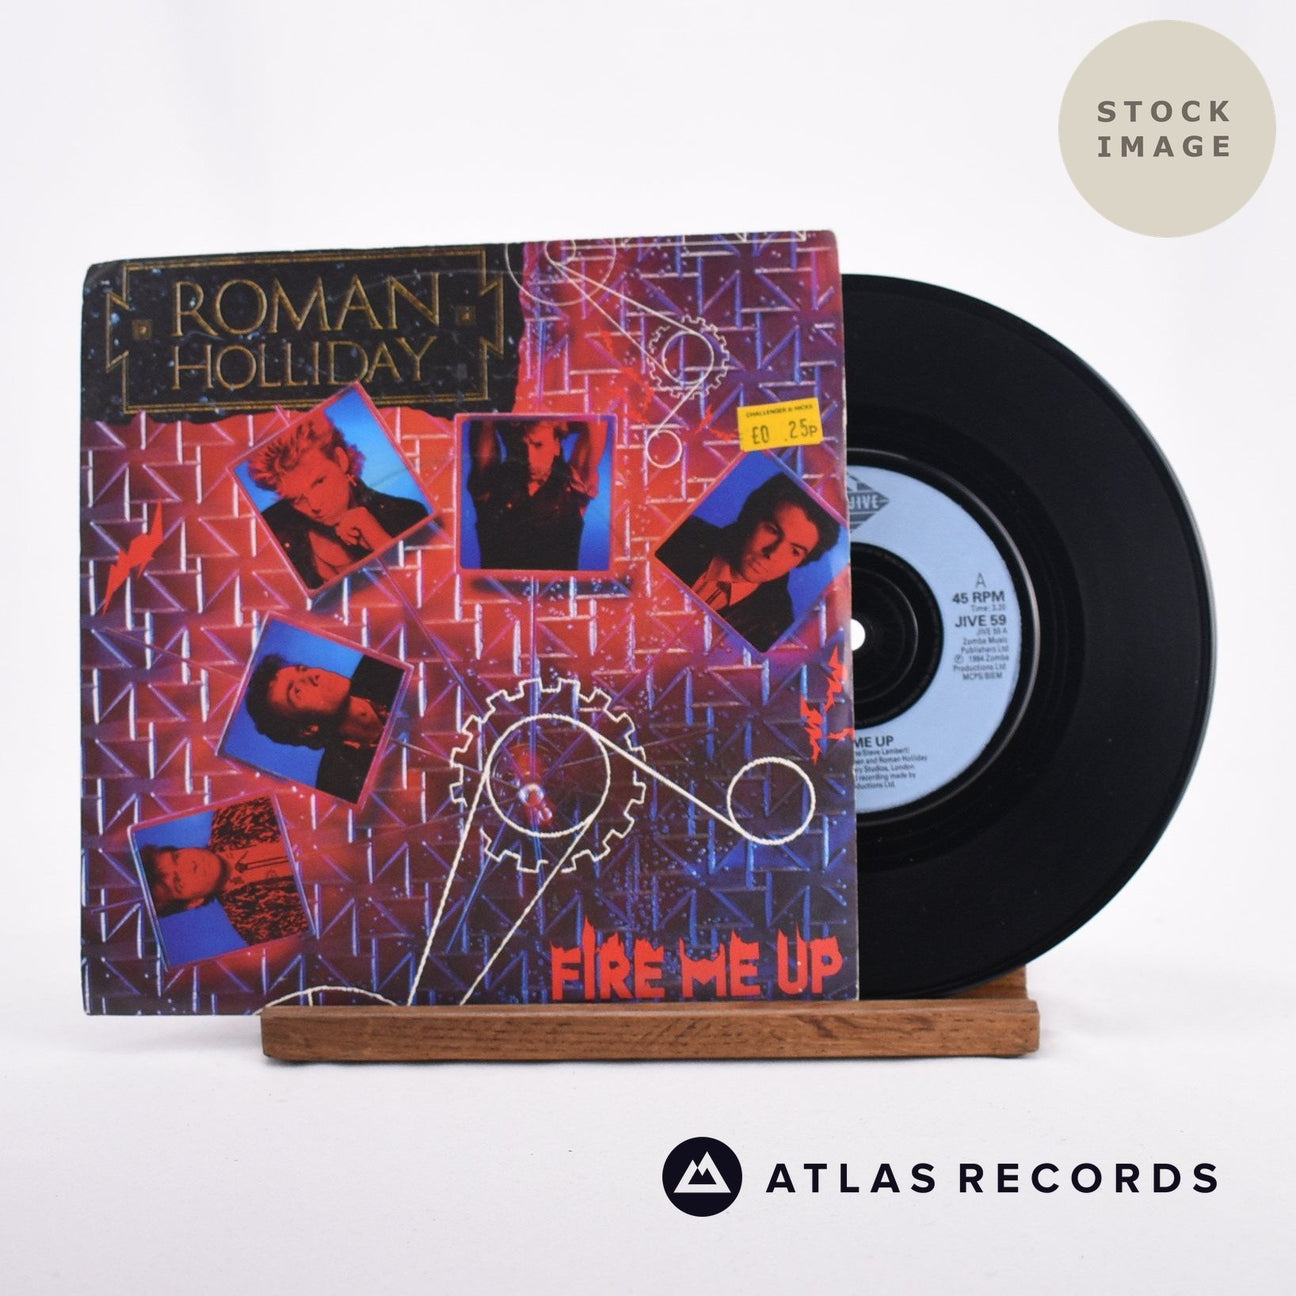 Roman Holliday Fire Me Up 7" Vinyl Record - Sleeve & Record Side-By-Side